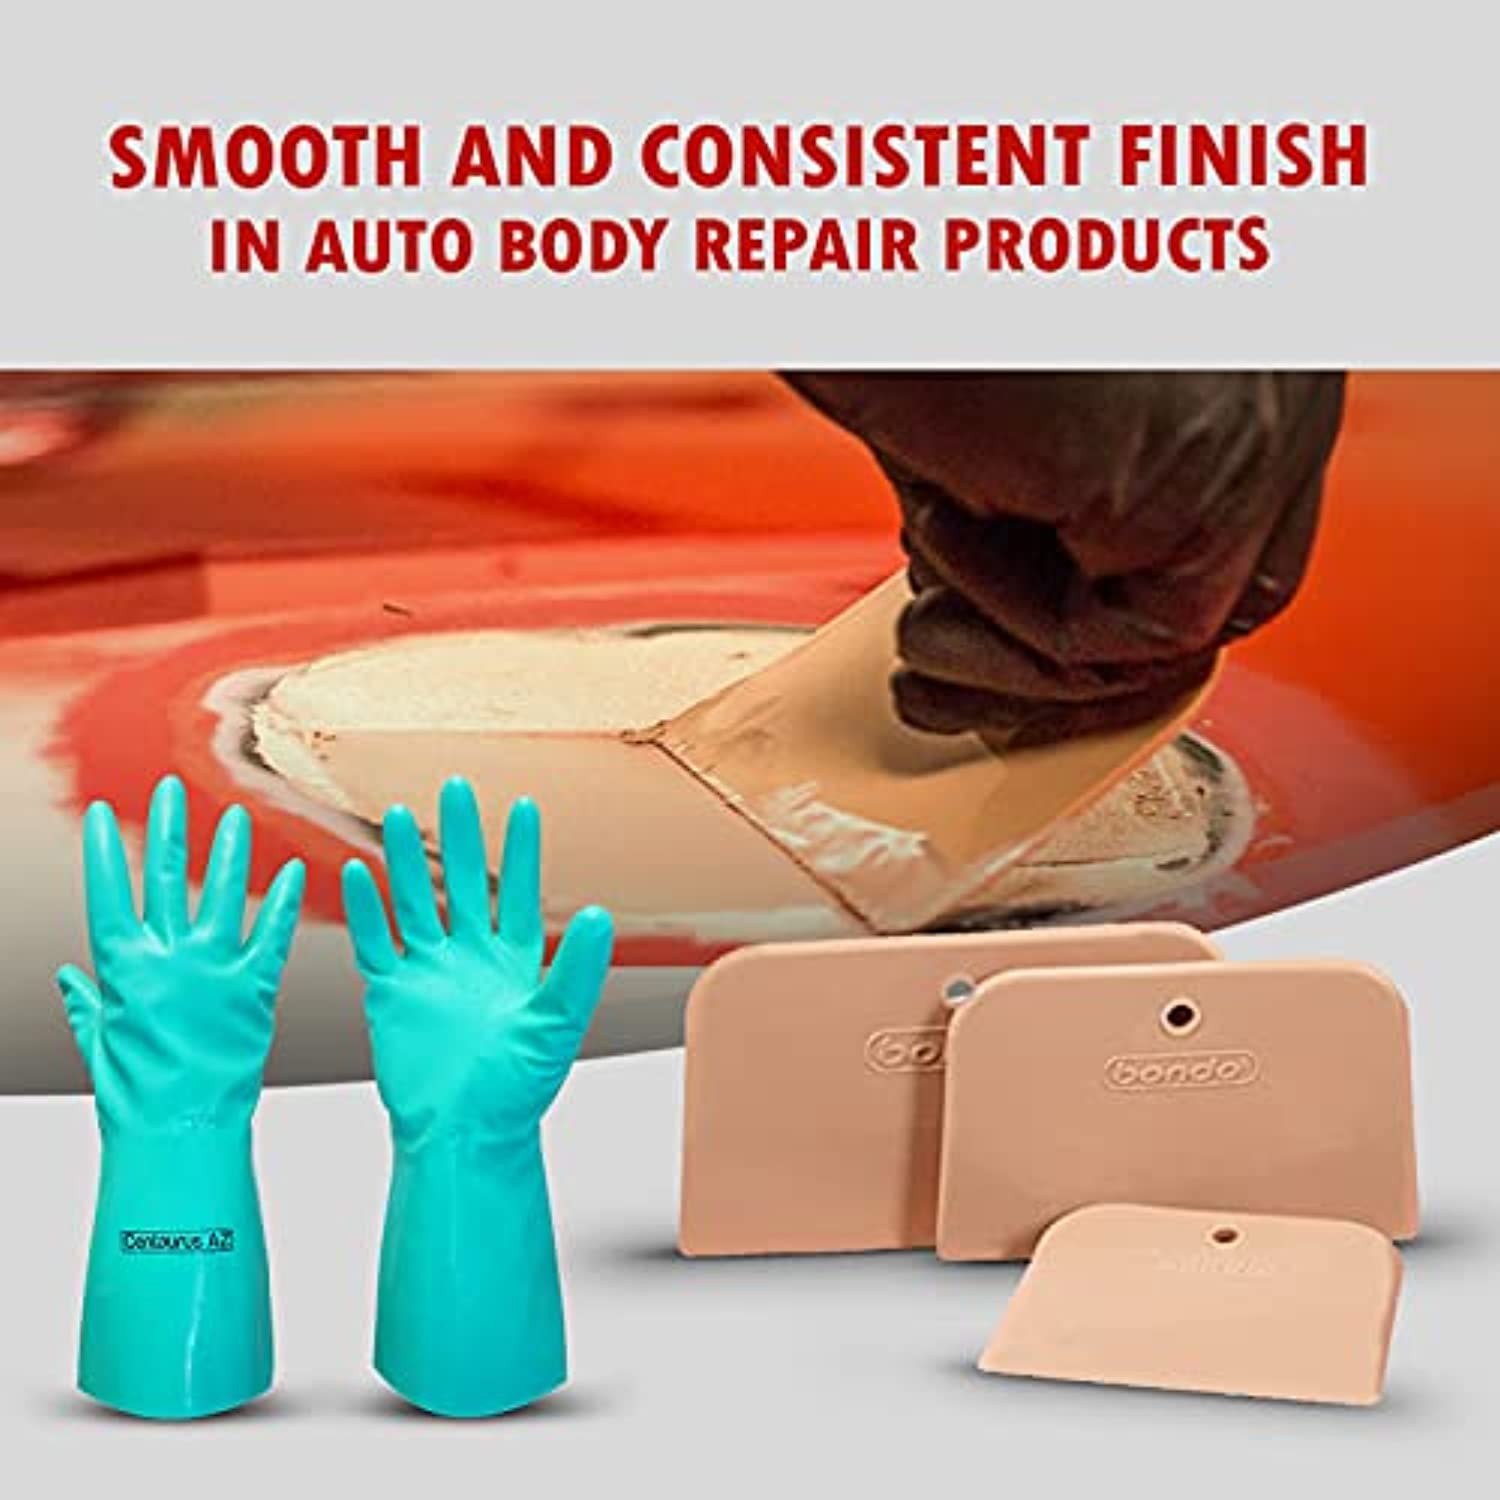 Centaurus AZ Durable Plastic Bondo Spreader with Flexible & Reusable Features-Ideal for Automotive Body Parts Comes with Three Different with Premium Quality Hand Safety Gloves